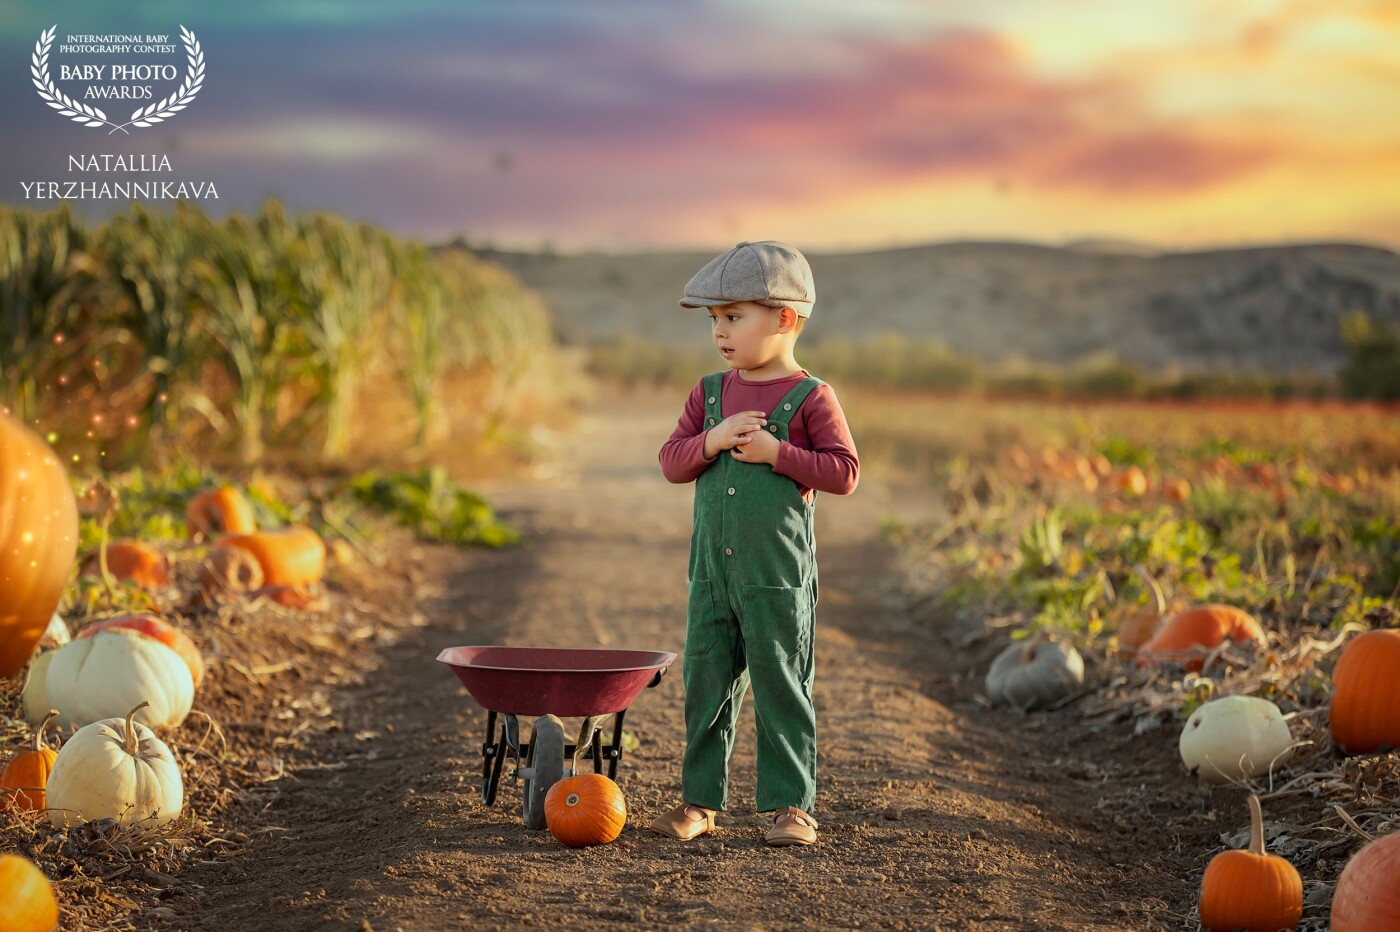 This California Pumpkin Patch experience was the first in his life for this little 3-year-old.  You can see how truly magical it was for him. There was something about the Pumpkin this Autumn. Something so special, that the boy would remember every day till Christmas.